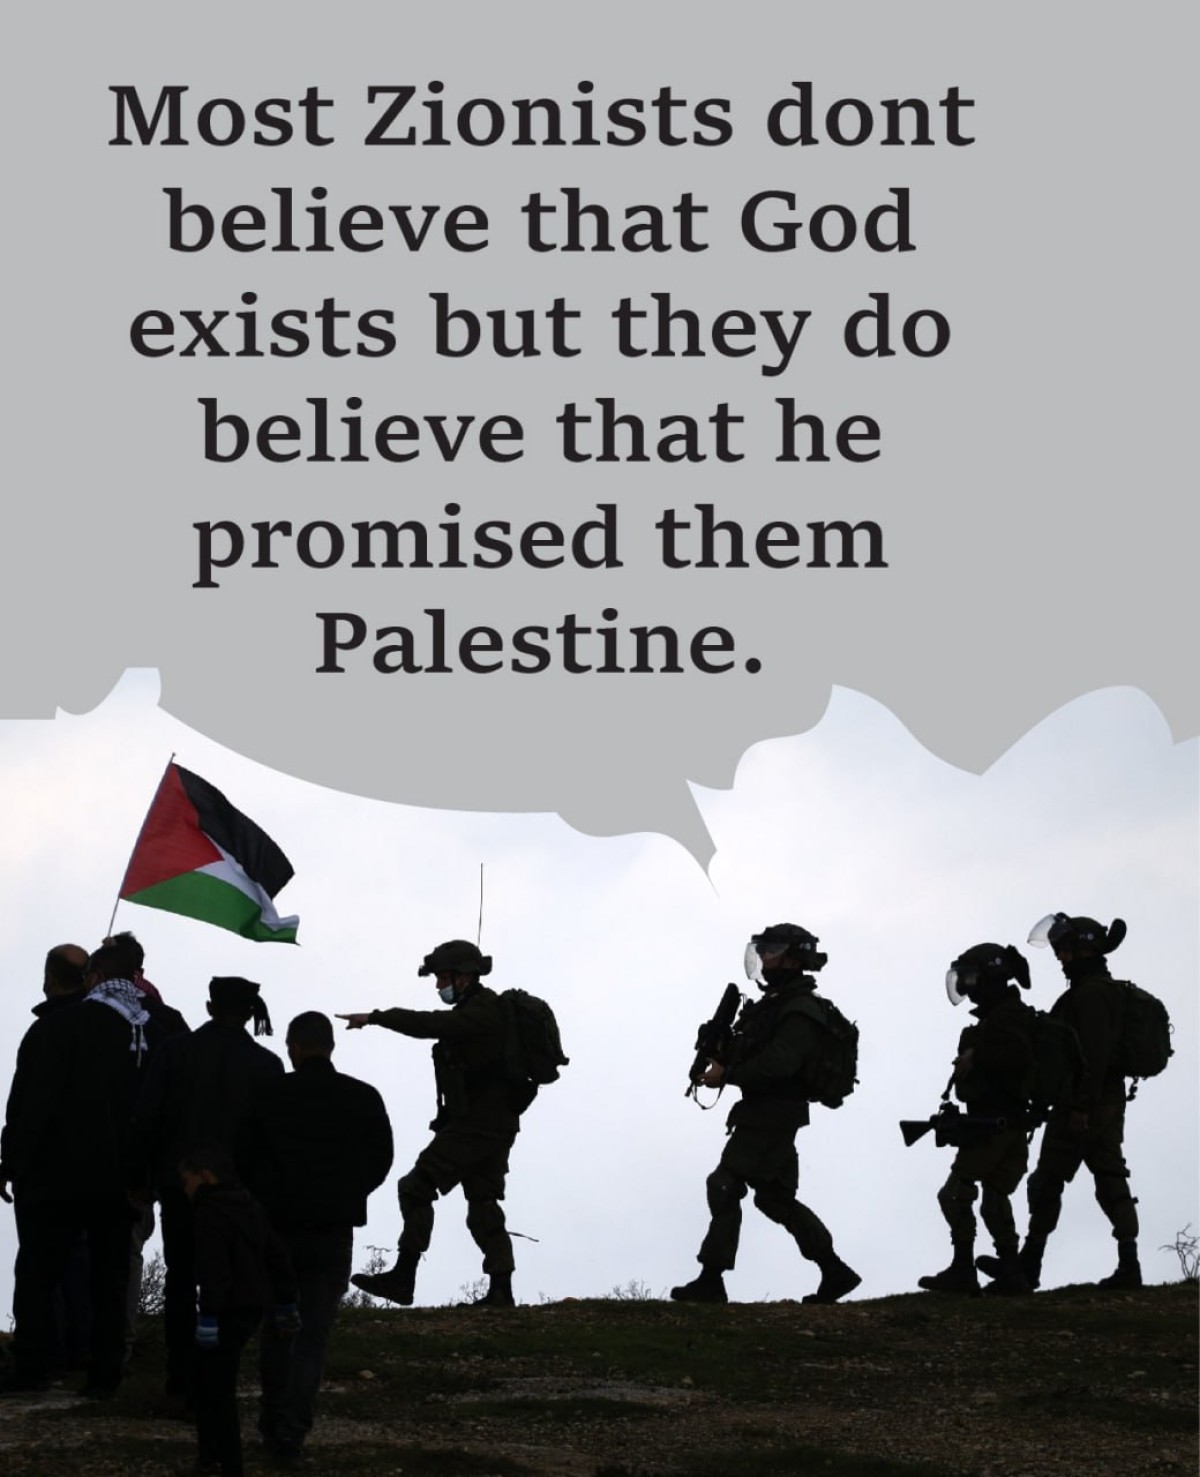 Most Zionists dont believe that God exists but they do believe that he promised them Palestine